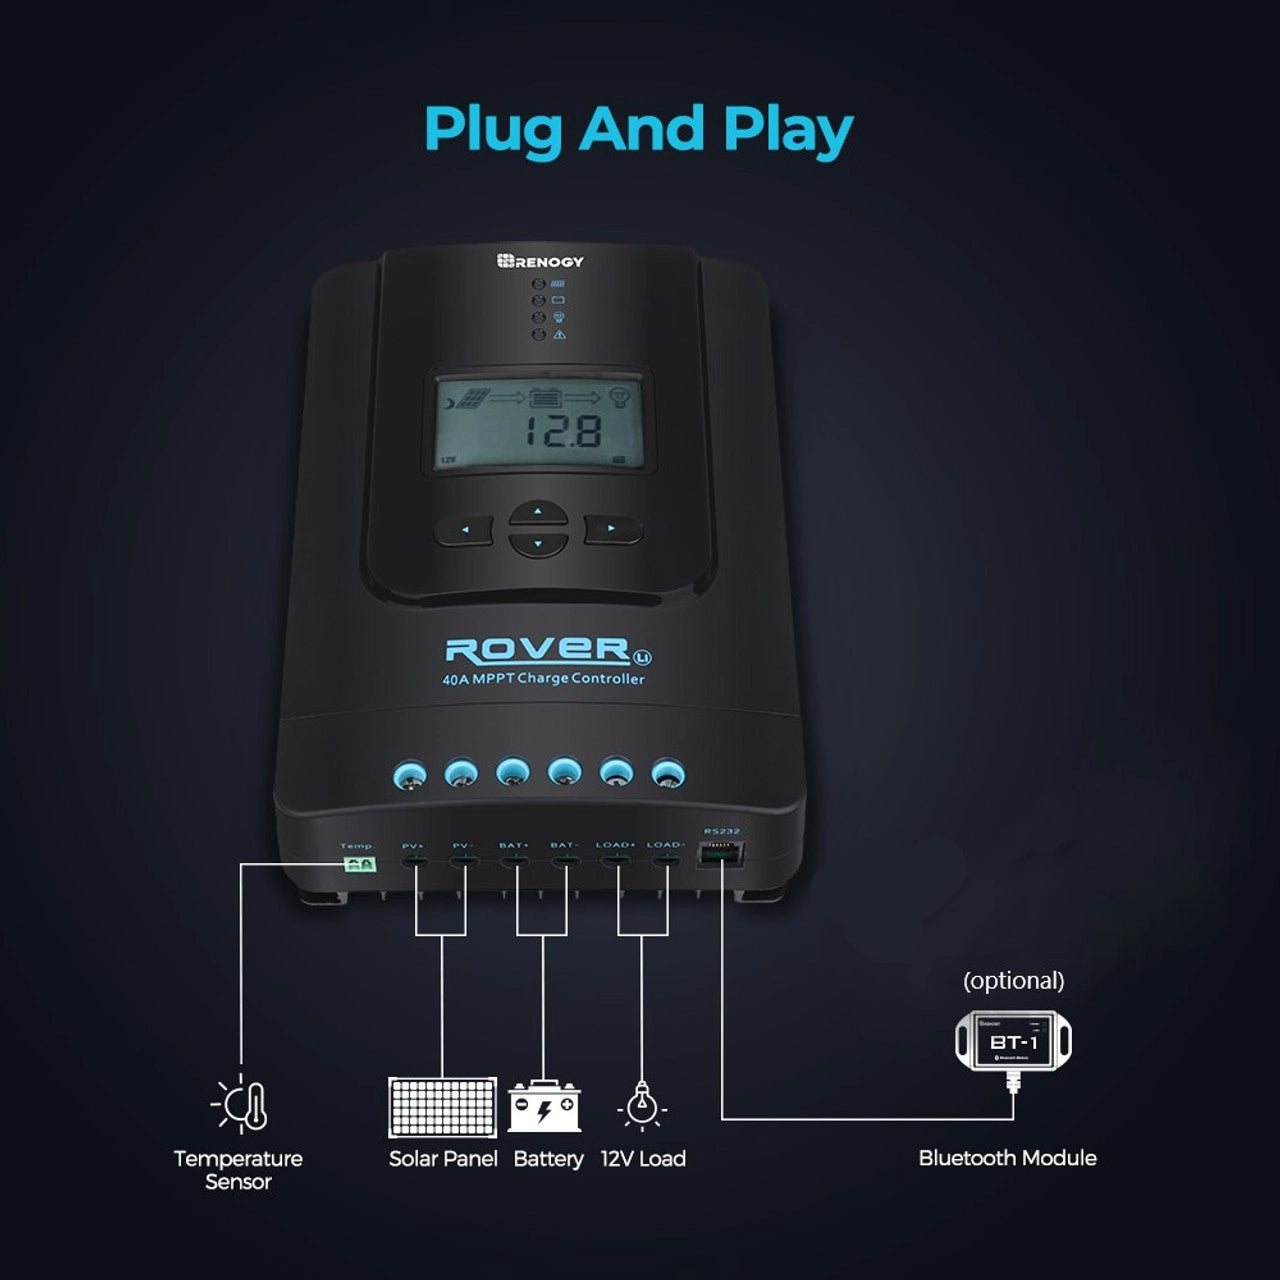 Rover Li 40 Amp MPPT Solar Charge Controller with Renogy ONE Core